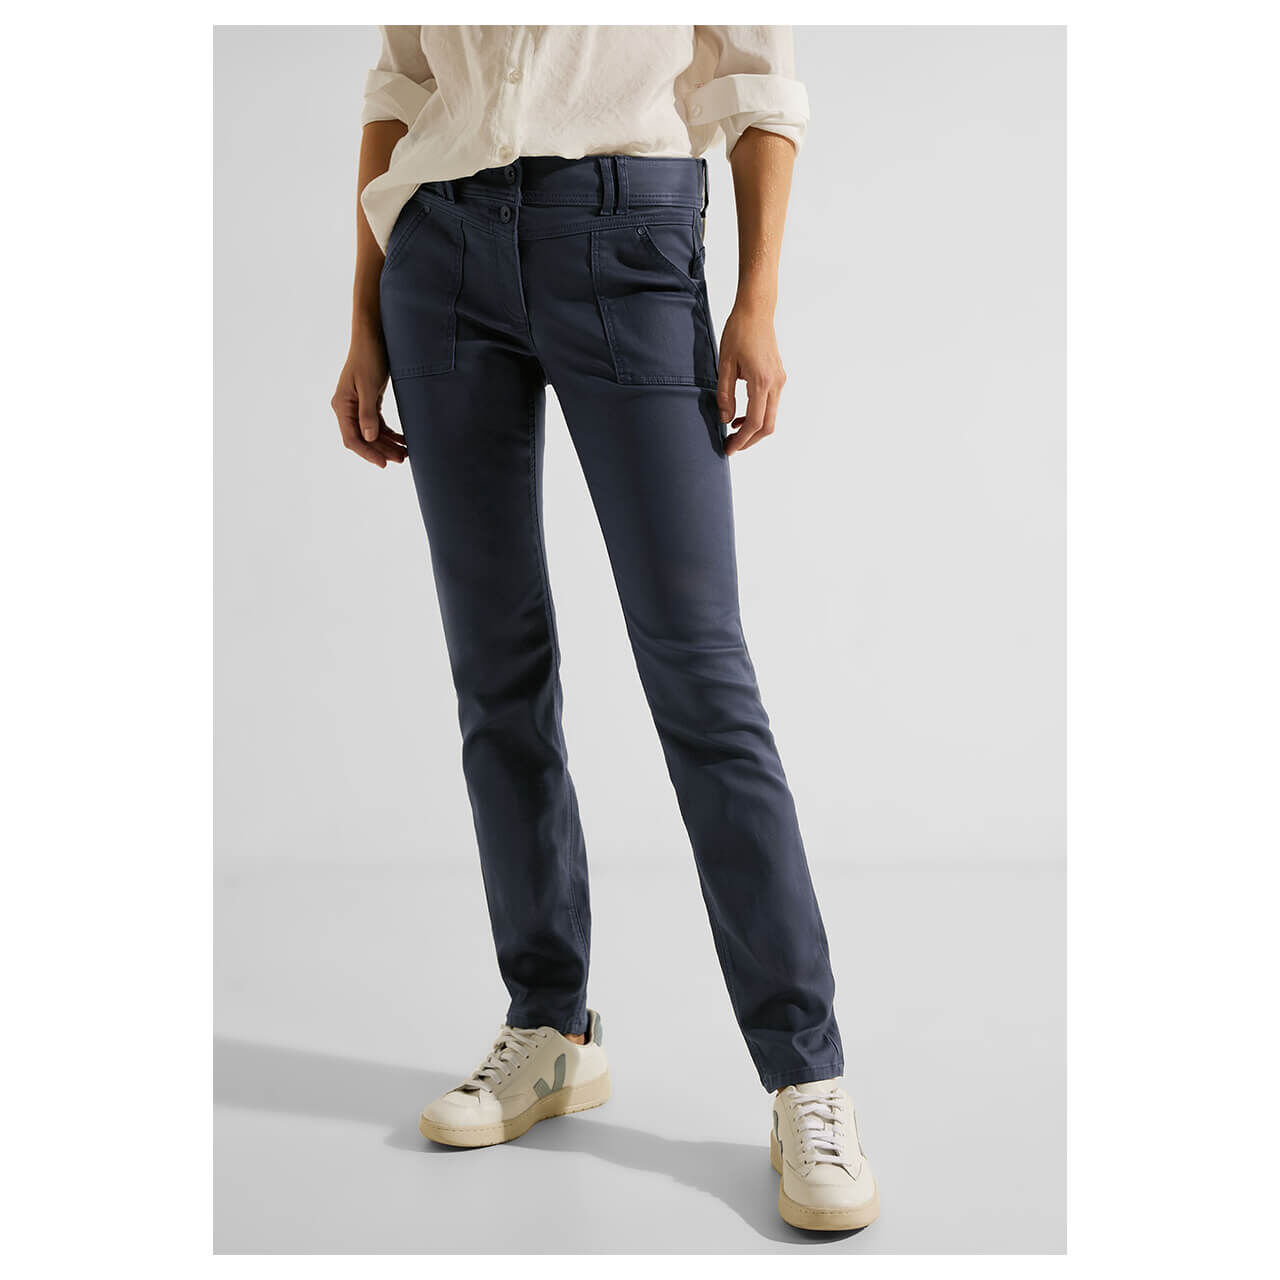 Cecil Toronto Jeans night sky blue coated 